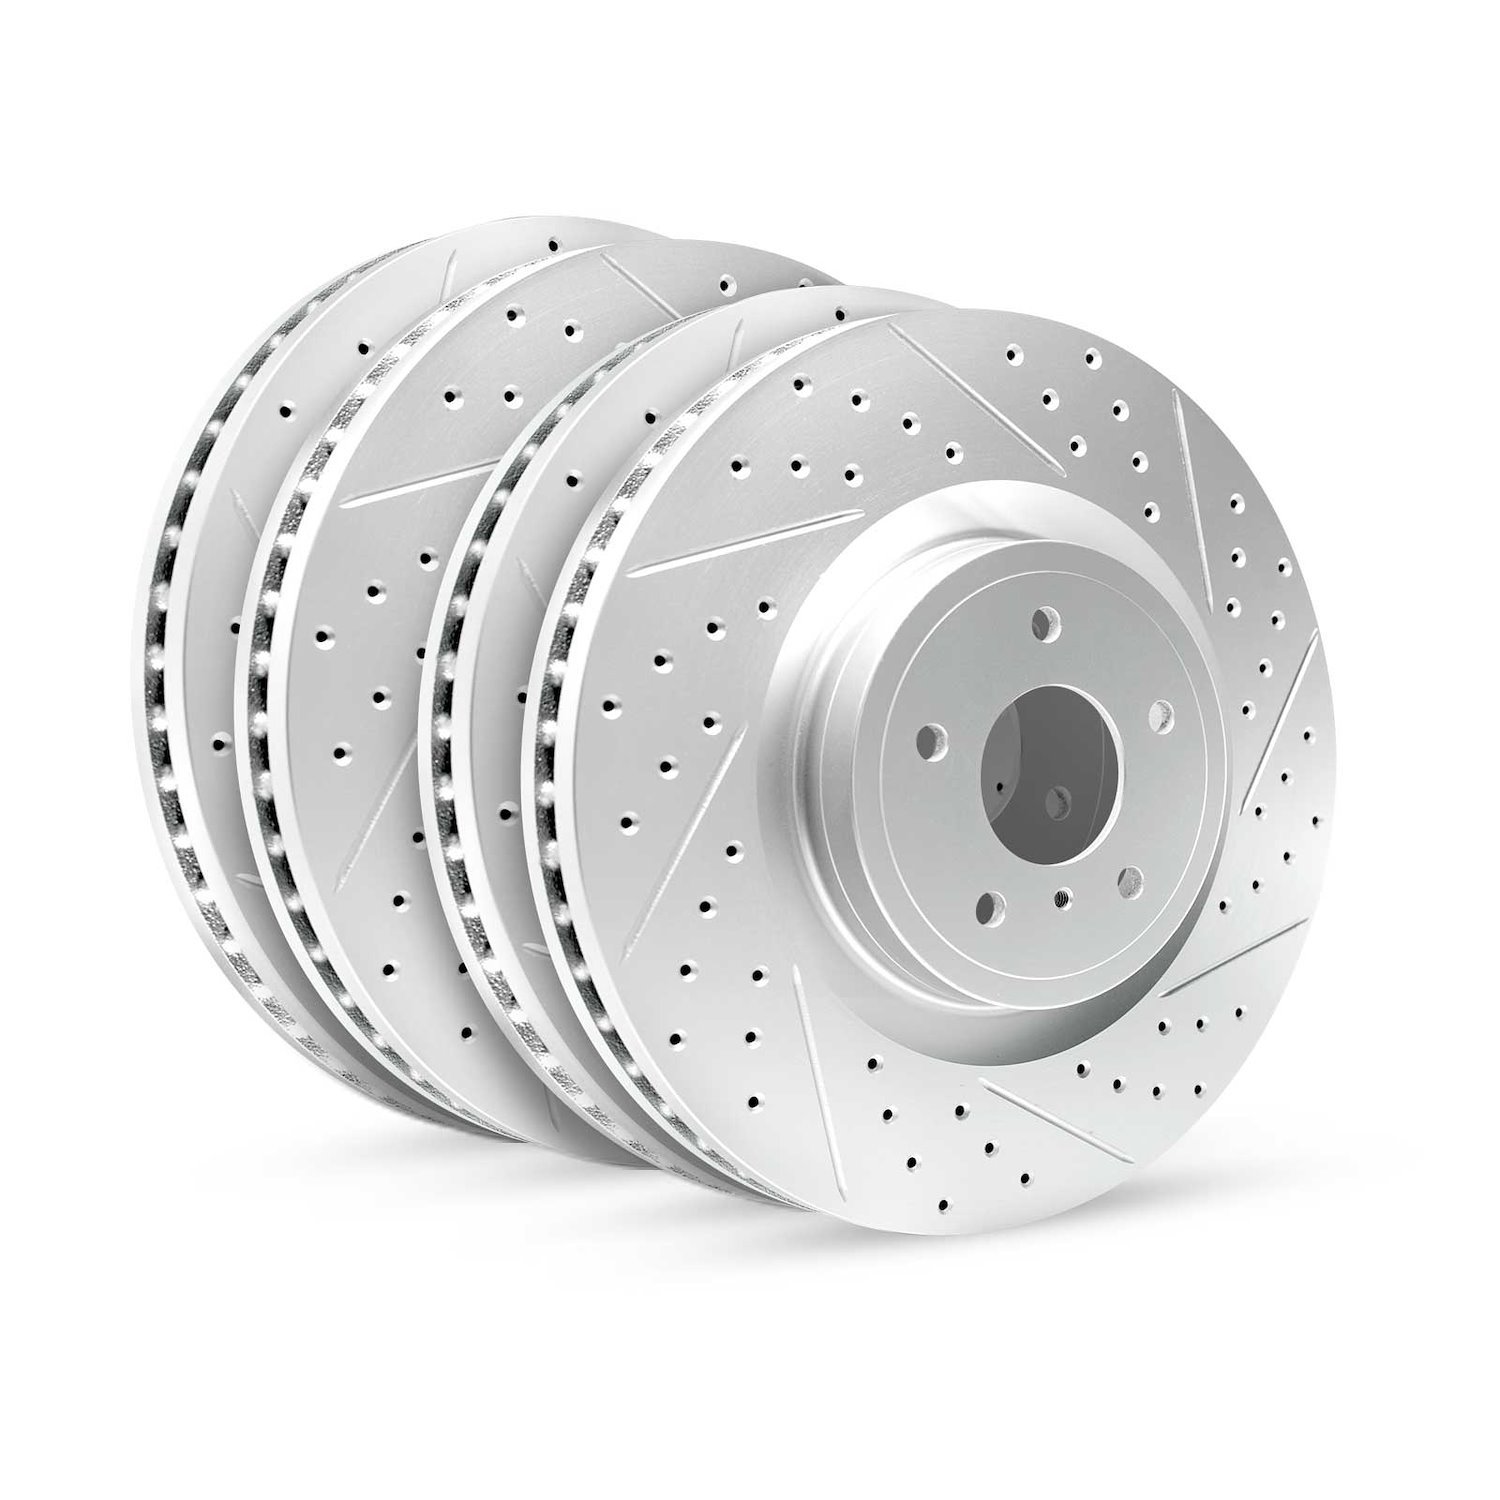 GEO-Carbon Drilled/Slotted Rotors, 2010-2017 Lexus/Toyota/Scion, Position: Front/Rear